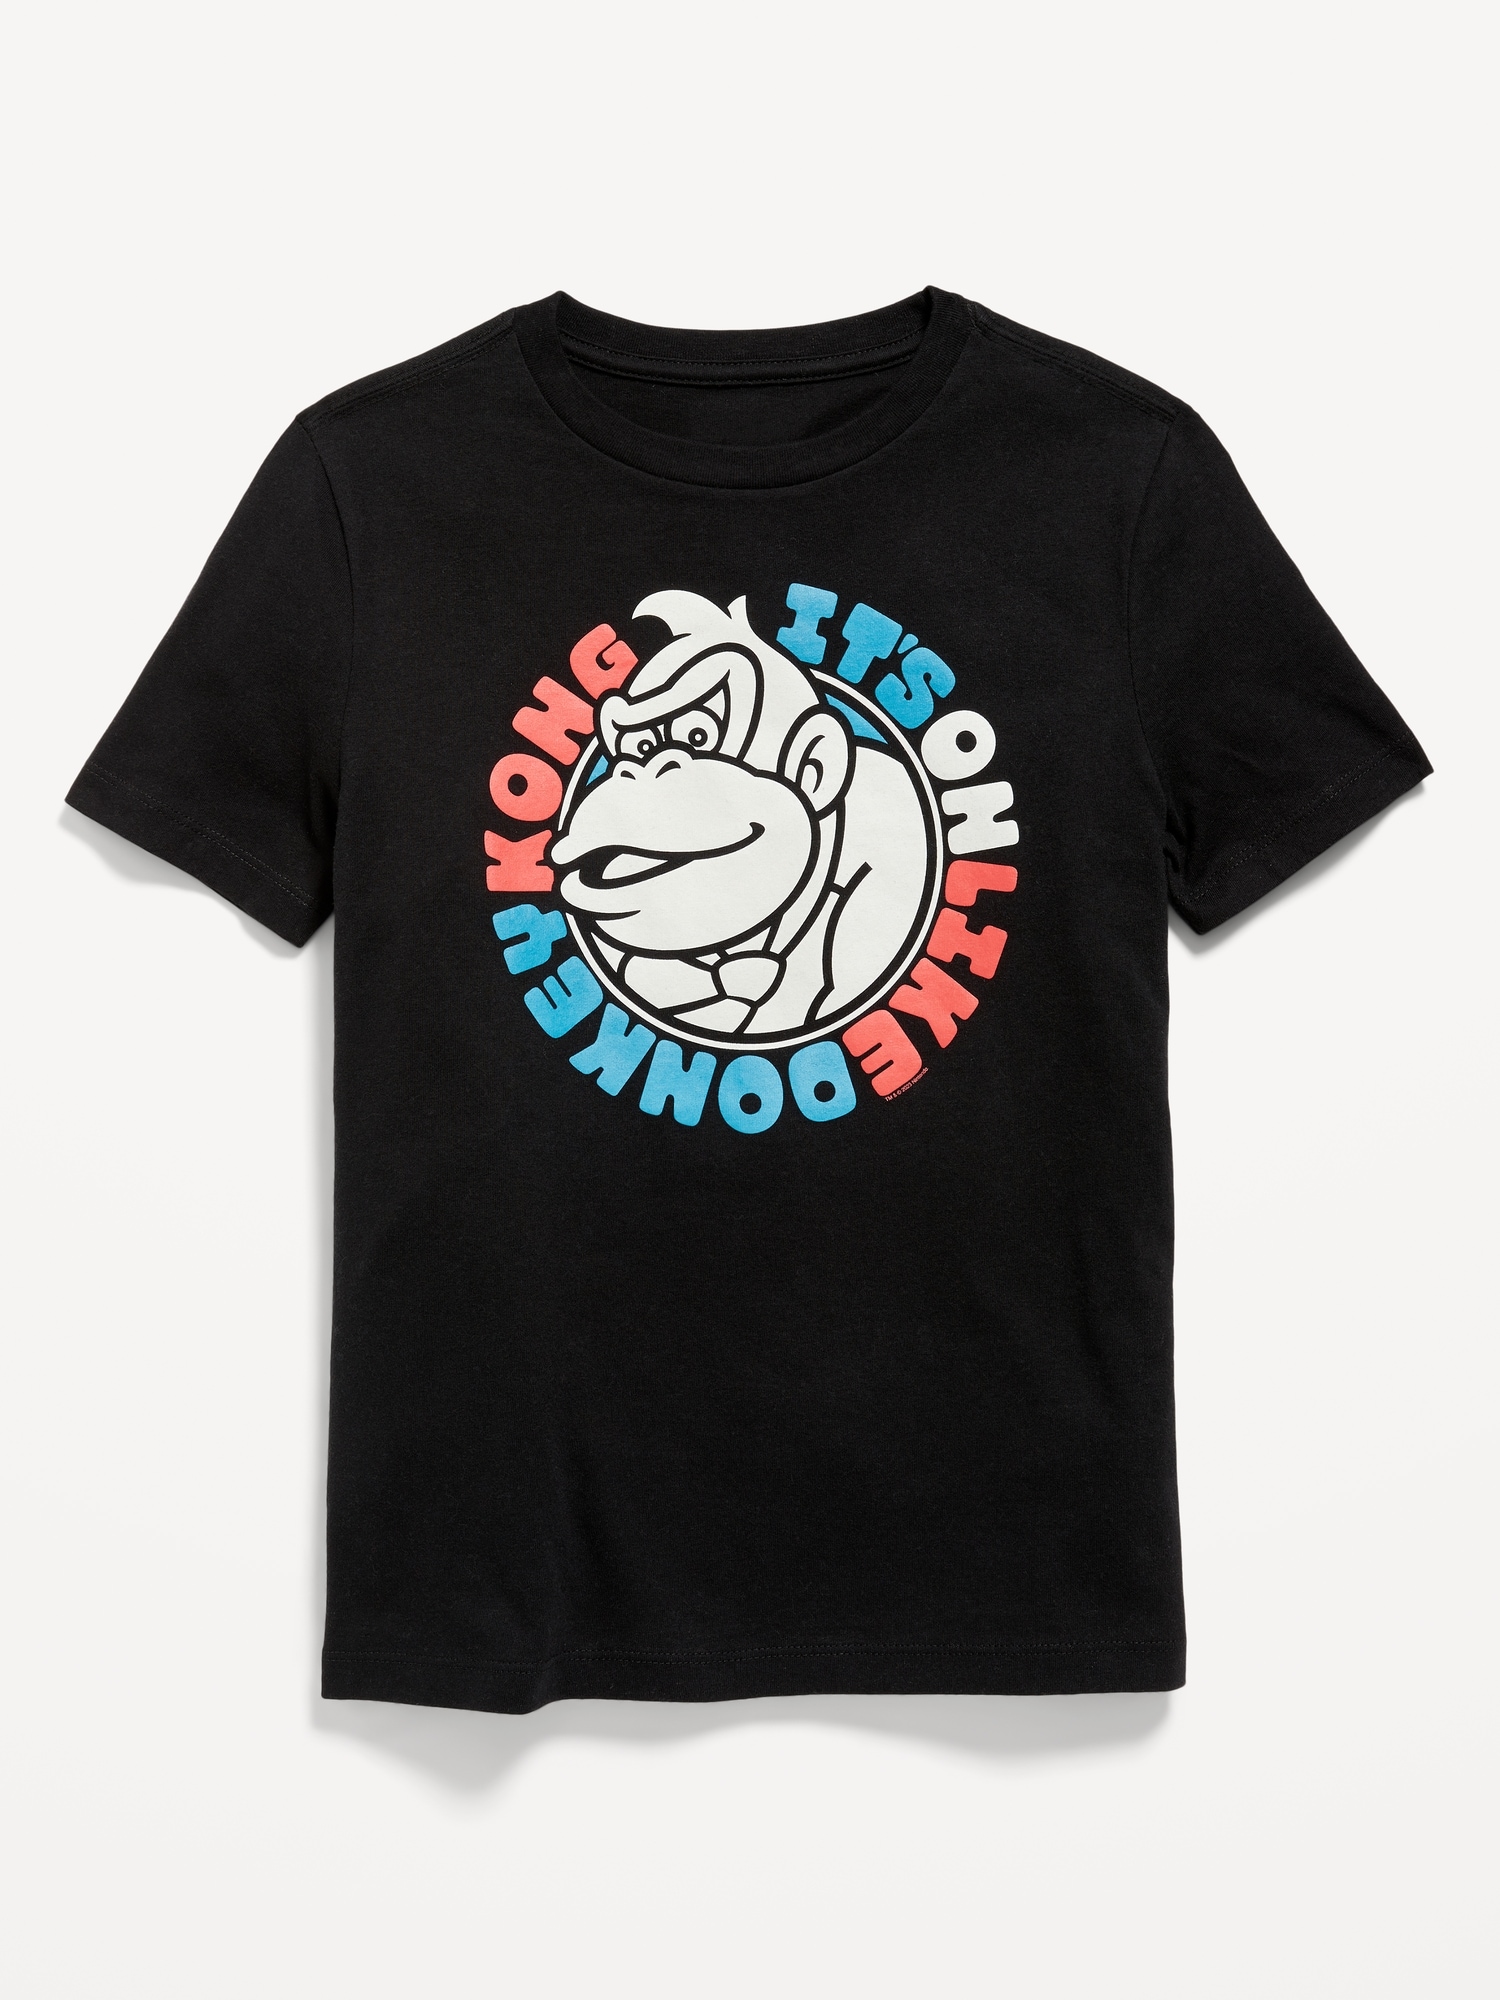 Donkey Kong™ Gender-Neutral Graphic T-Shirt for Kids